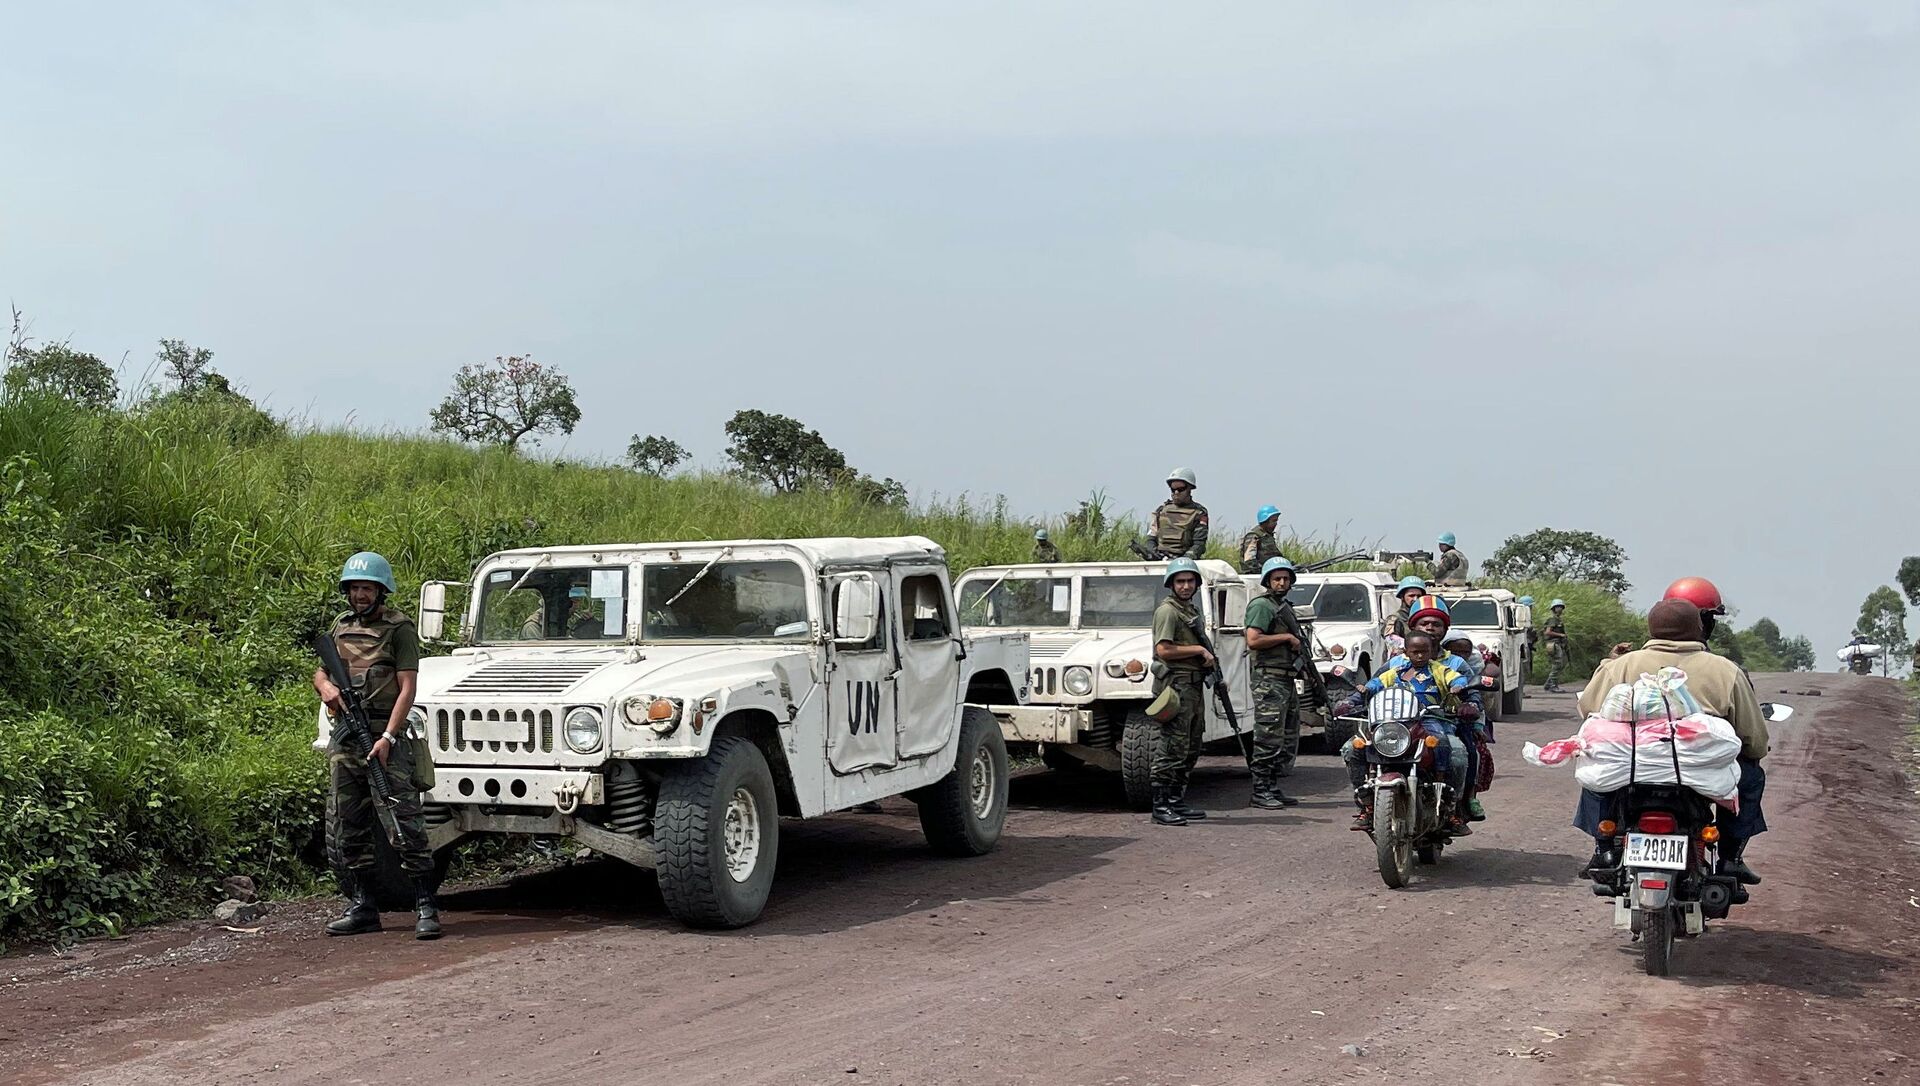 Peacekeepers serving in the United Nations Organization Stabilization Mission in the Democratic Republic of the Congo (MONUSCO) secure the scene where the Italian ambassador to Democratic Republic of Congo Luca Attanasio, Italian military policeman Vittorio Iacovacci and Congolese driver Moustapha Milambo from the World Food Programme were killed in an attempted kidnap when their convoy was attacked in Ruhimba village, eastern Democratic Republic of the Congo February 22, 2021. - Sputnik International, 1920, 22.02.2021